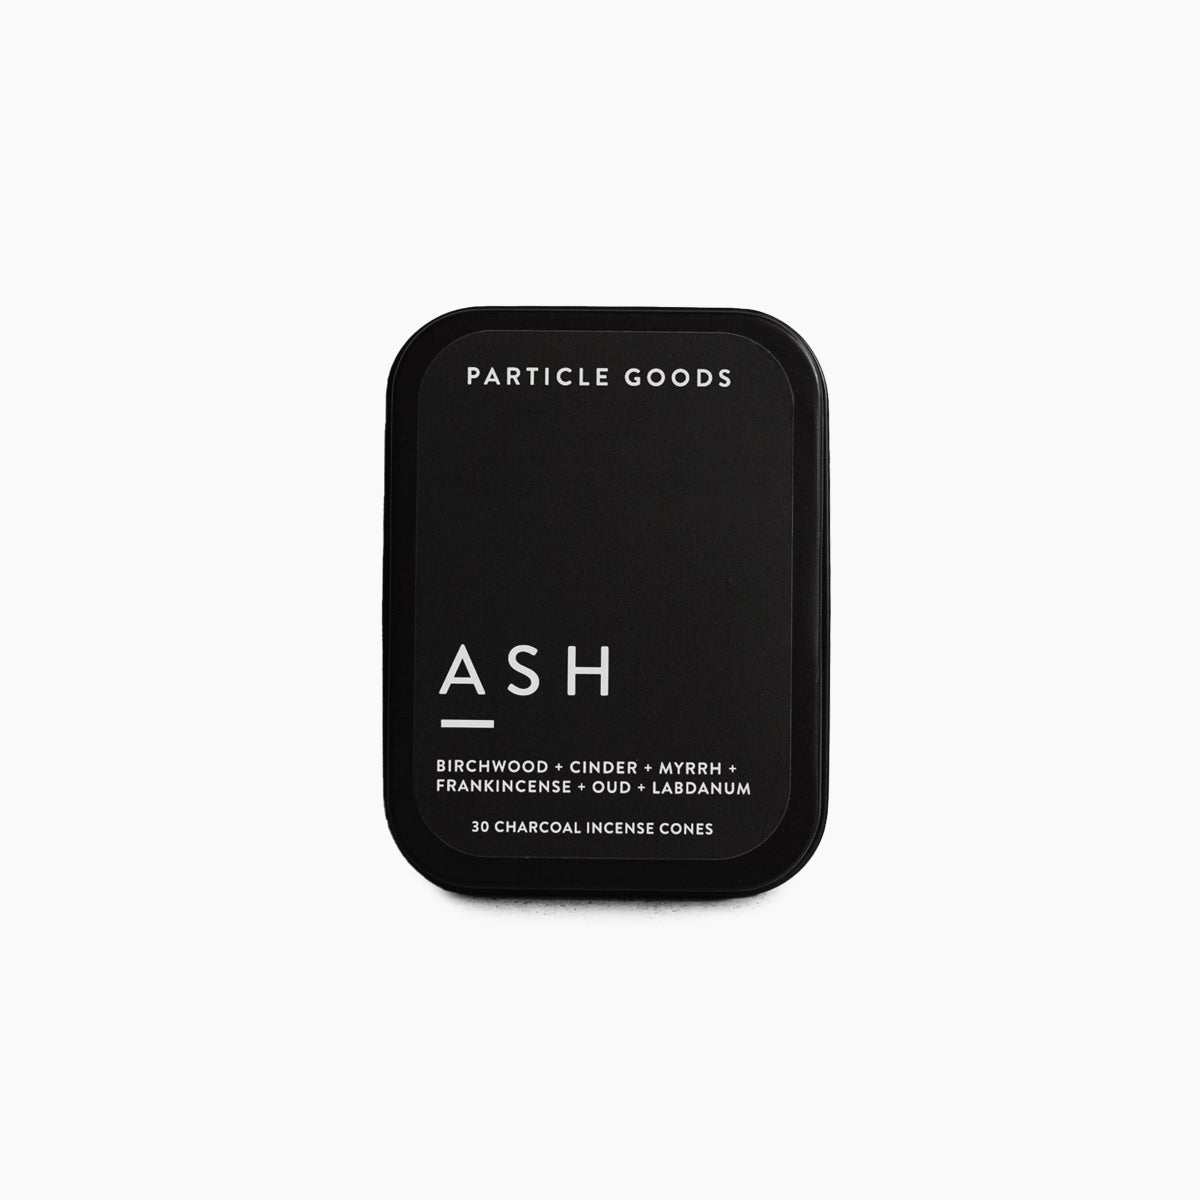 Rectangular matte black tin containing thirty incense cones in the scent Ash. Made by Particle Goods in Seattle, WA.